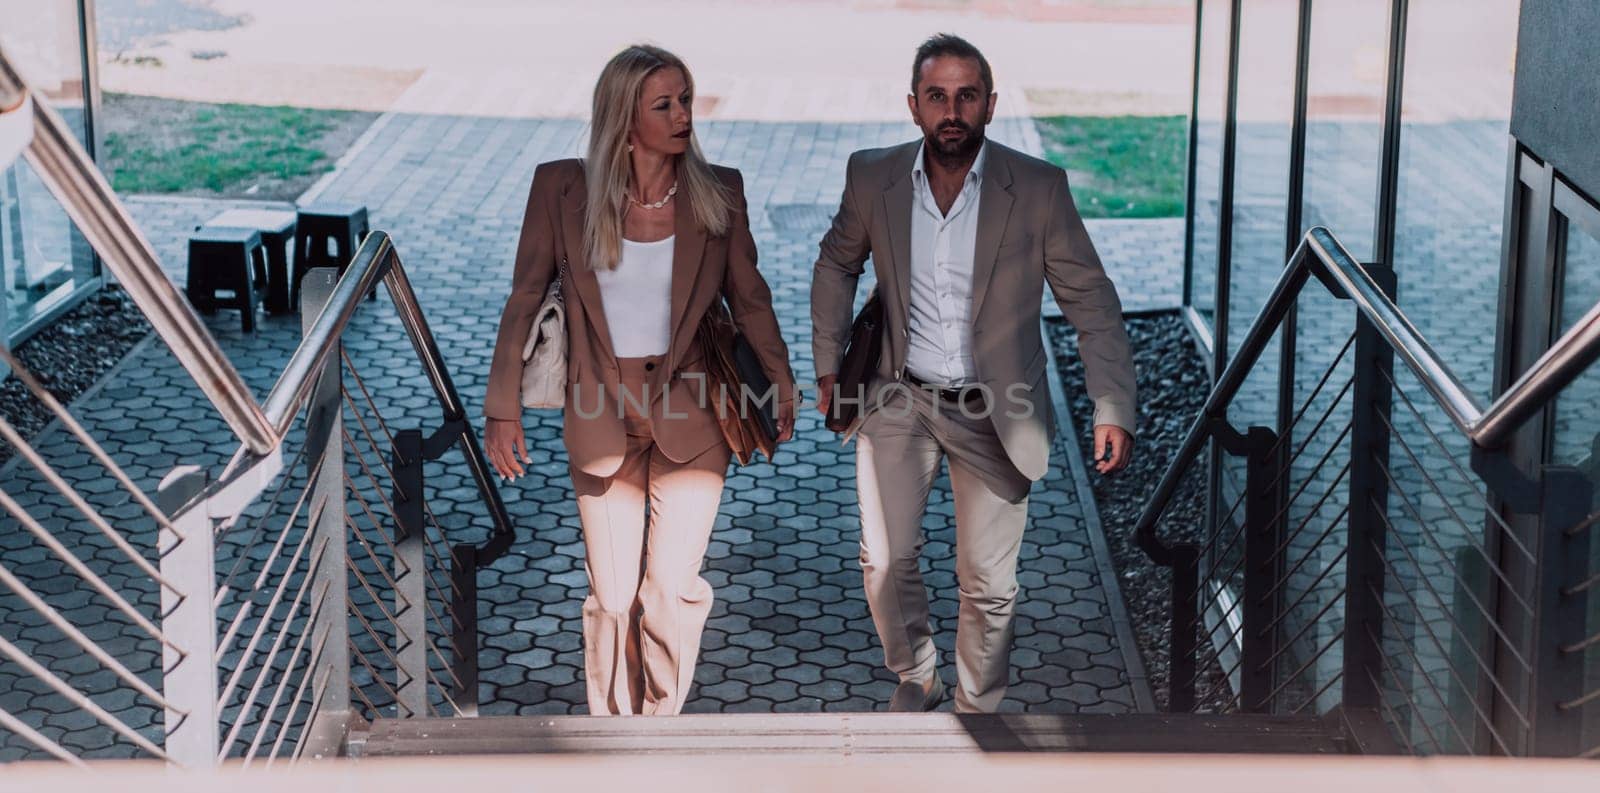 Modern business couple after a long day's work, walking together towards the comfort of their home, embodying the perfect blend of professional success and personal contentment. by dotshock